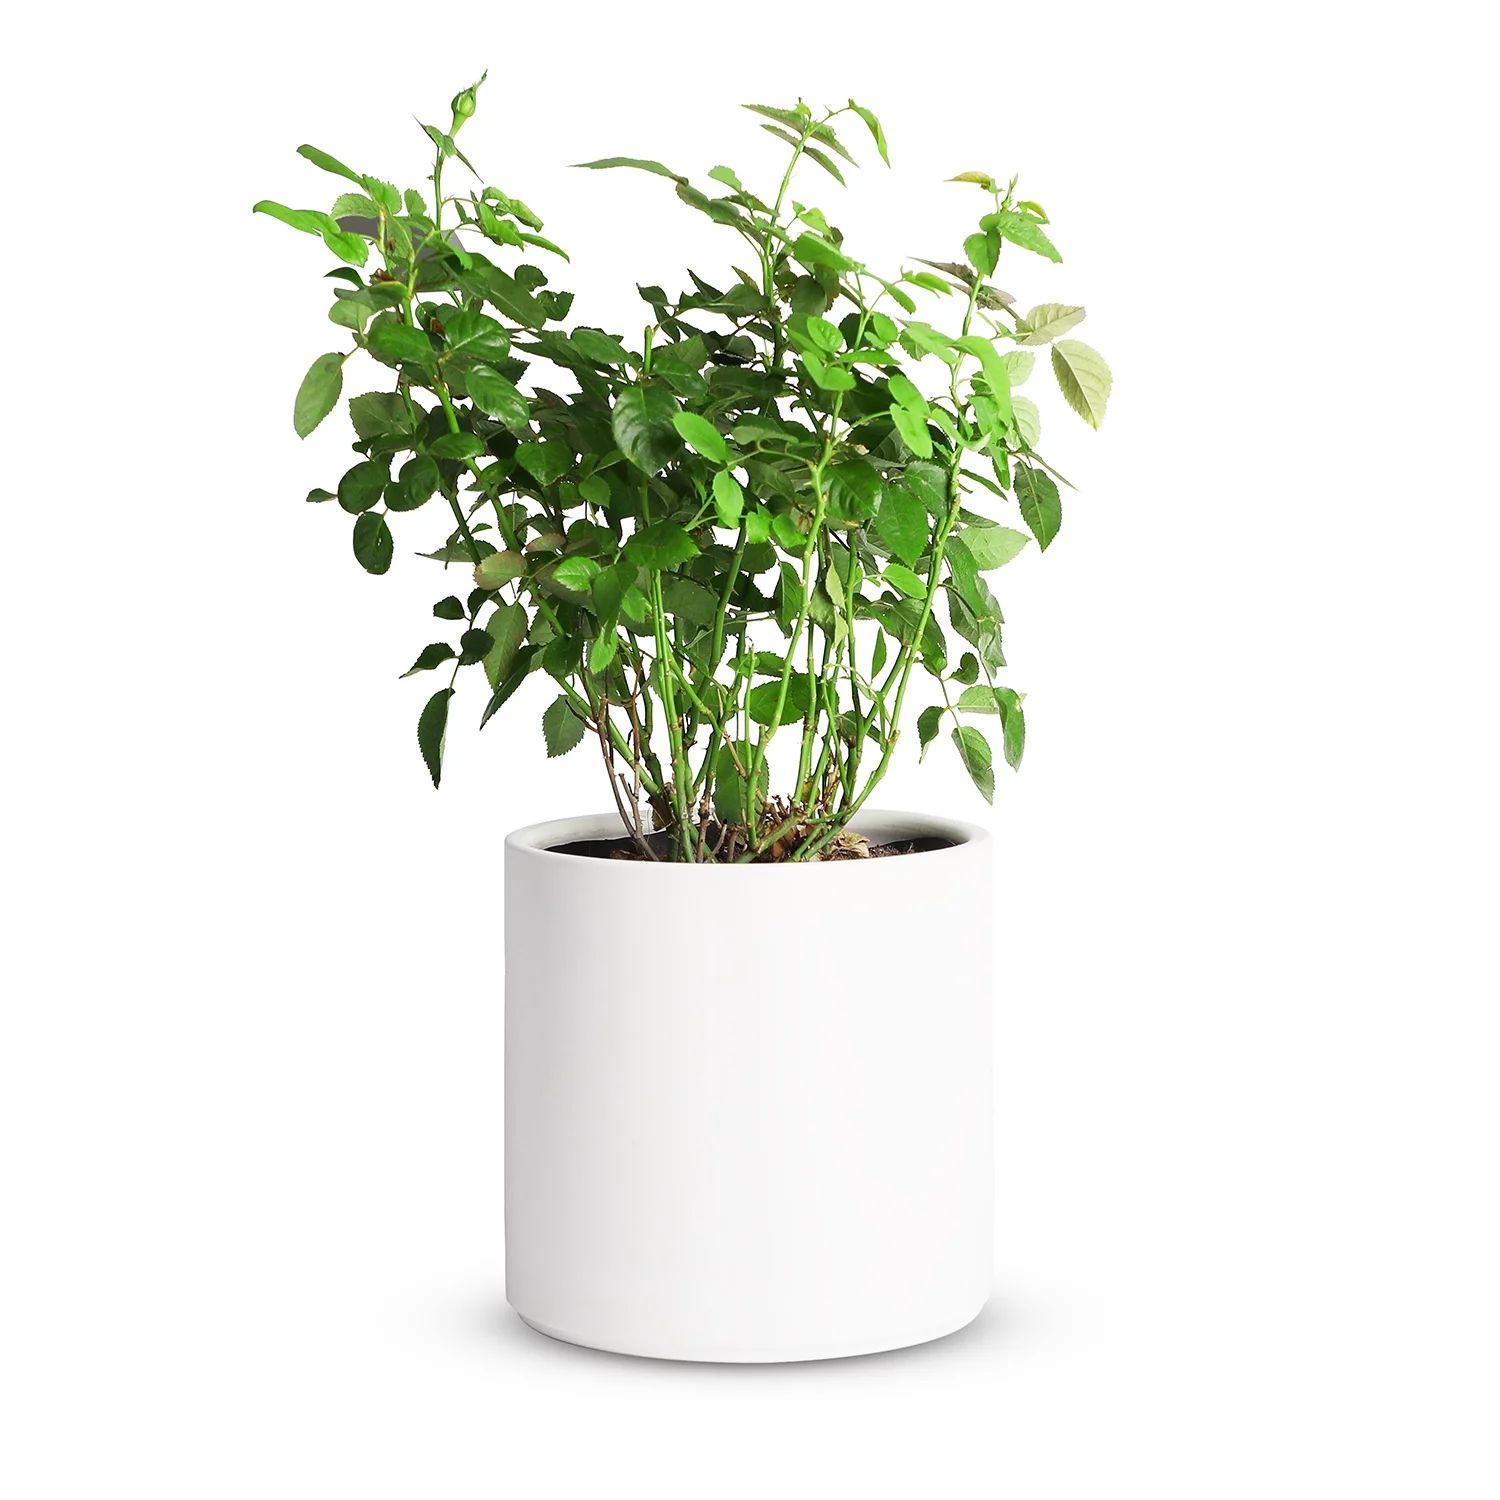 Mozing Ceramic Plant Pots Indoor - 10 x 10 inch Modern Flower Pot with Drainage Hole (White) | Walmart (US)